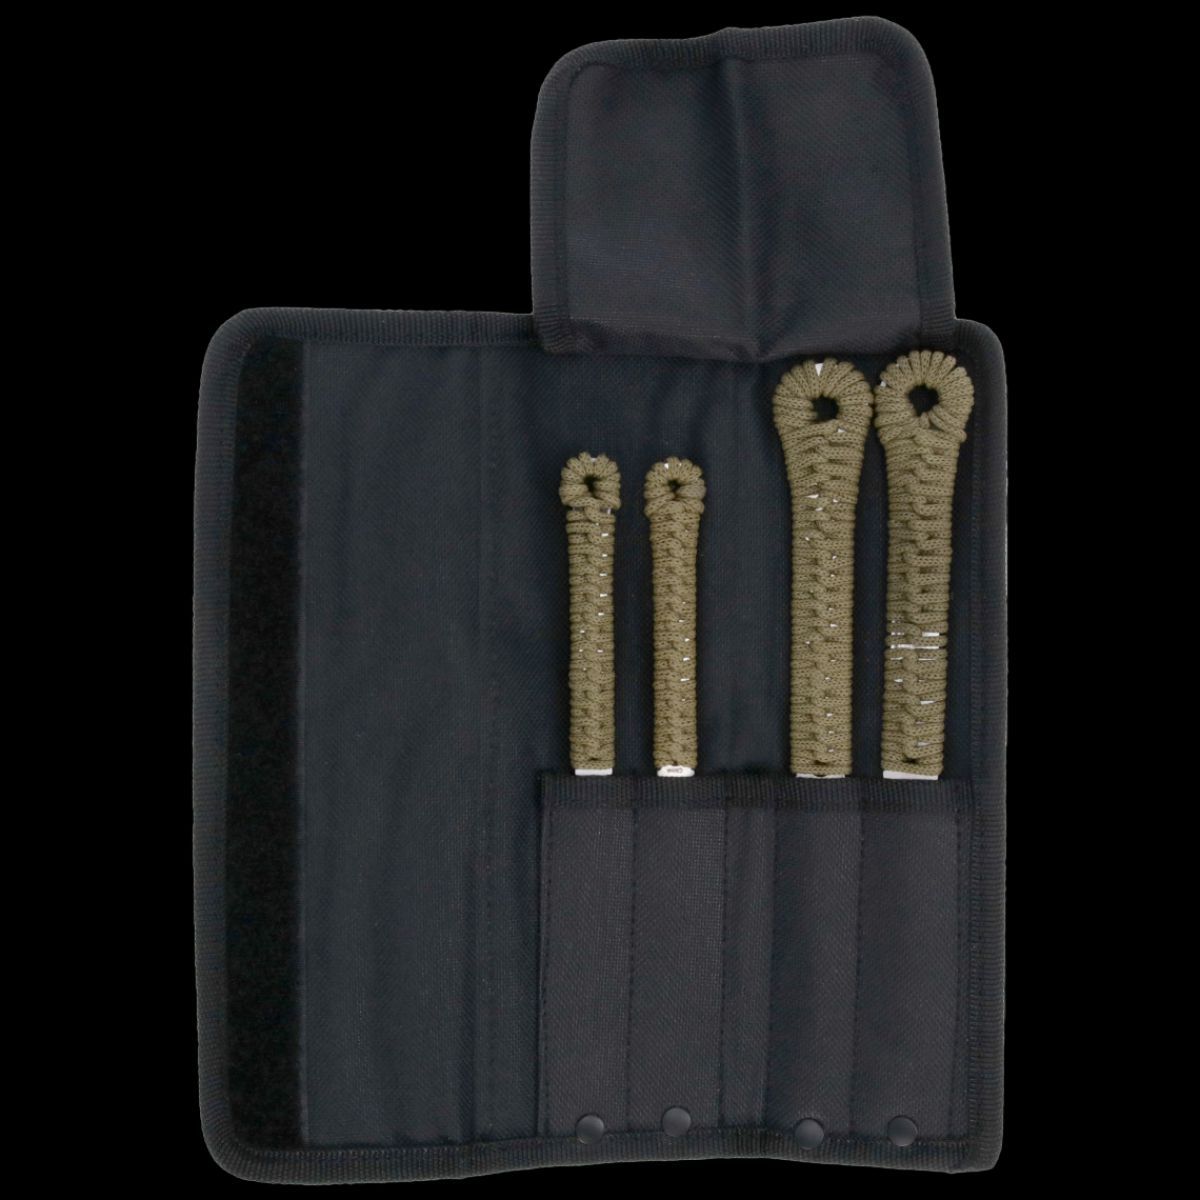 THROWING SPIKES - 4 PACK WITH POUCH